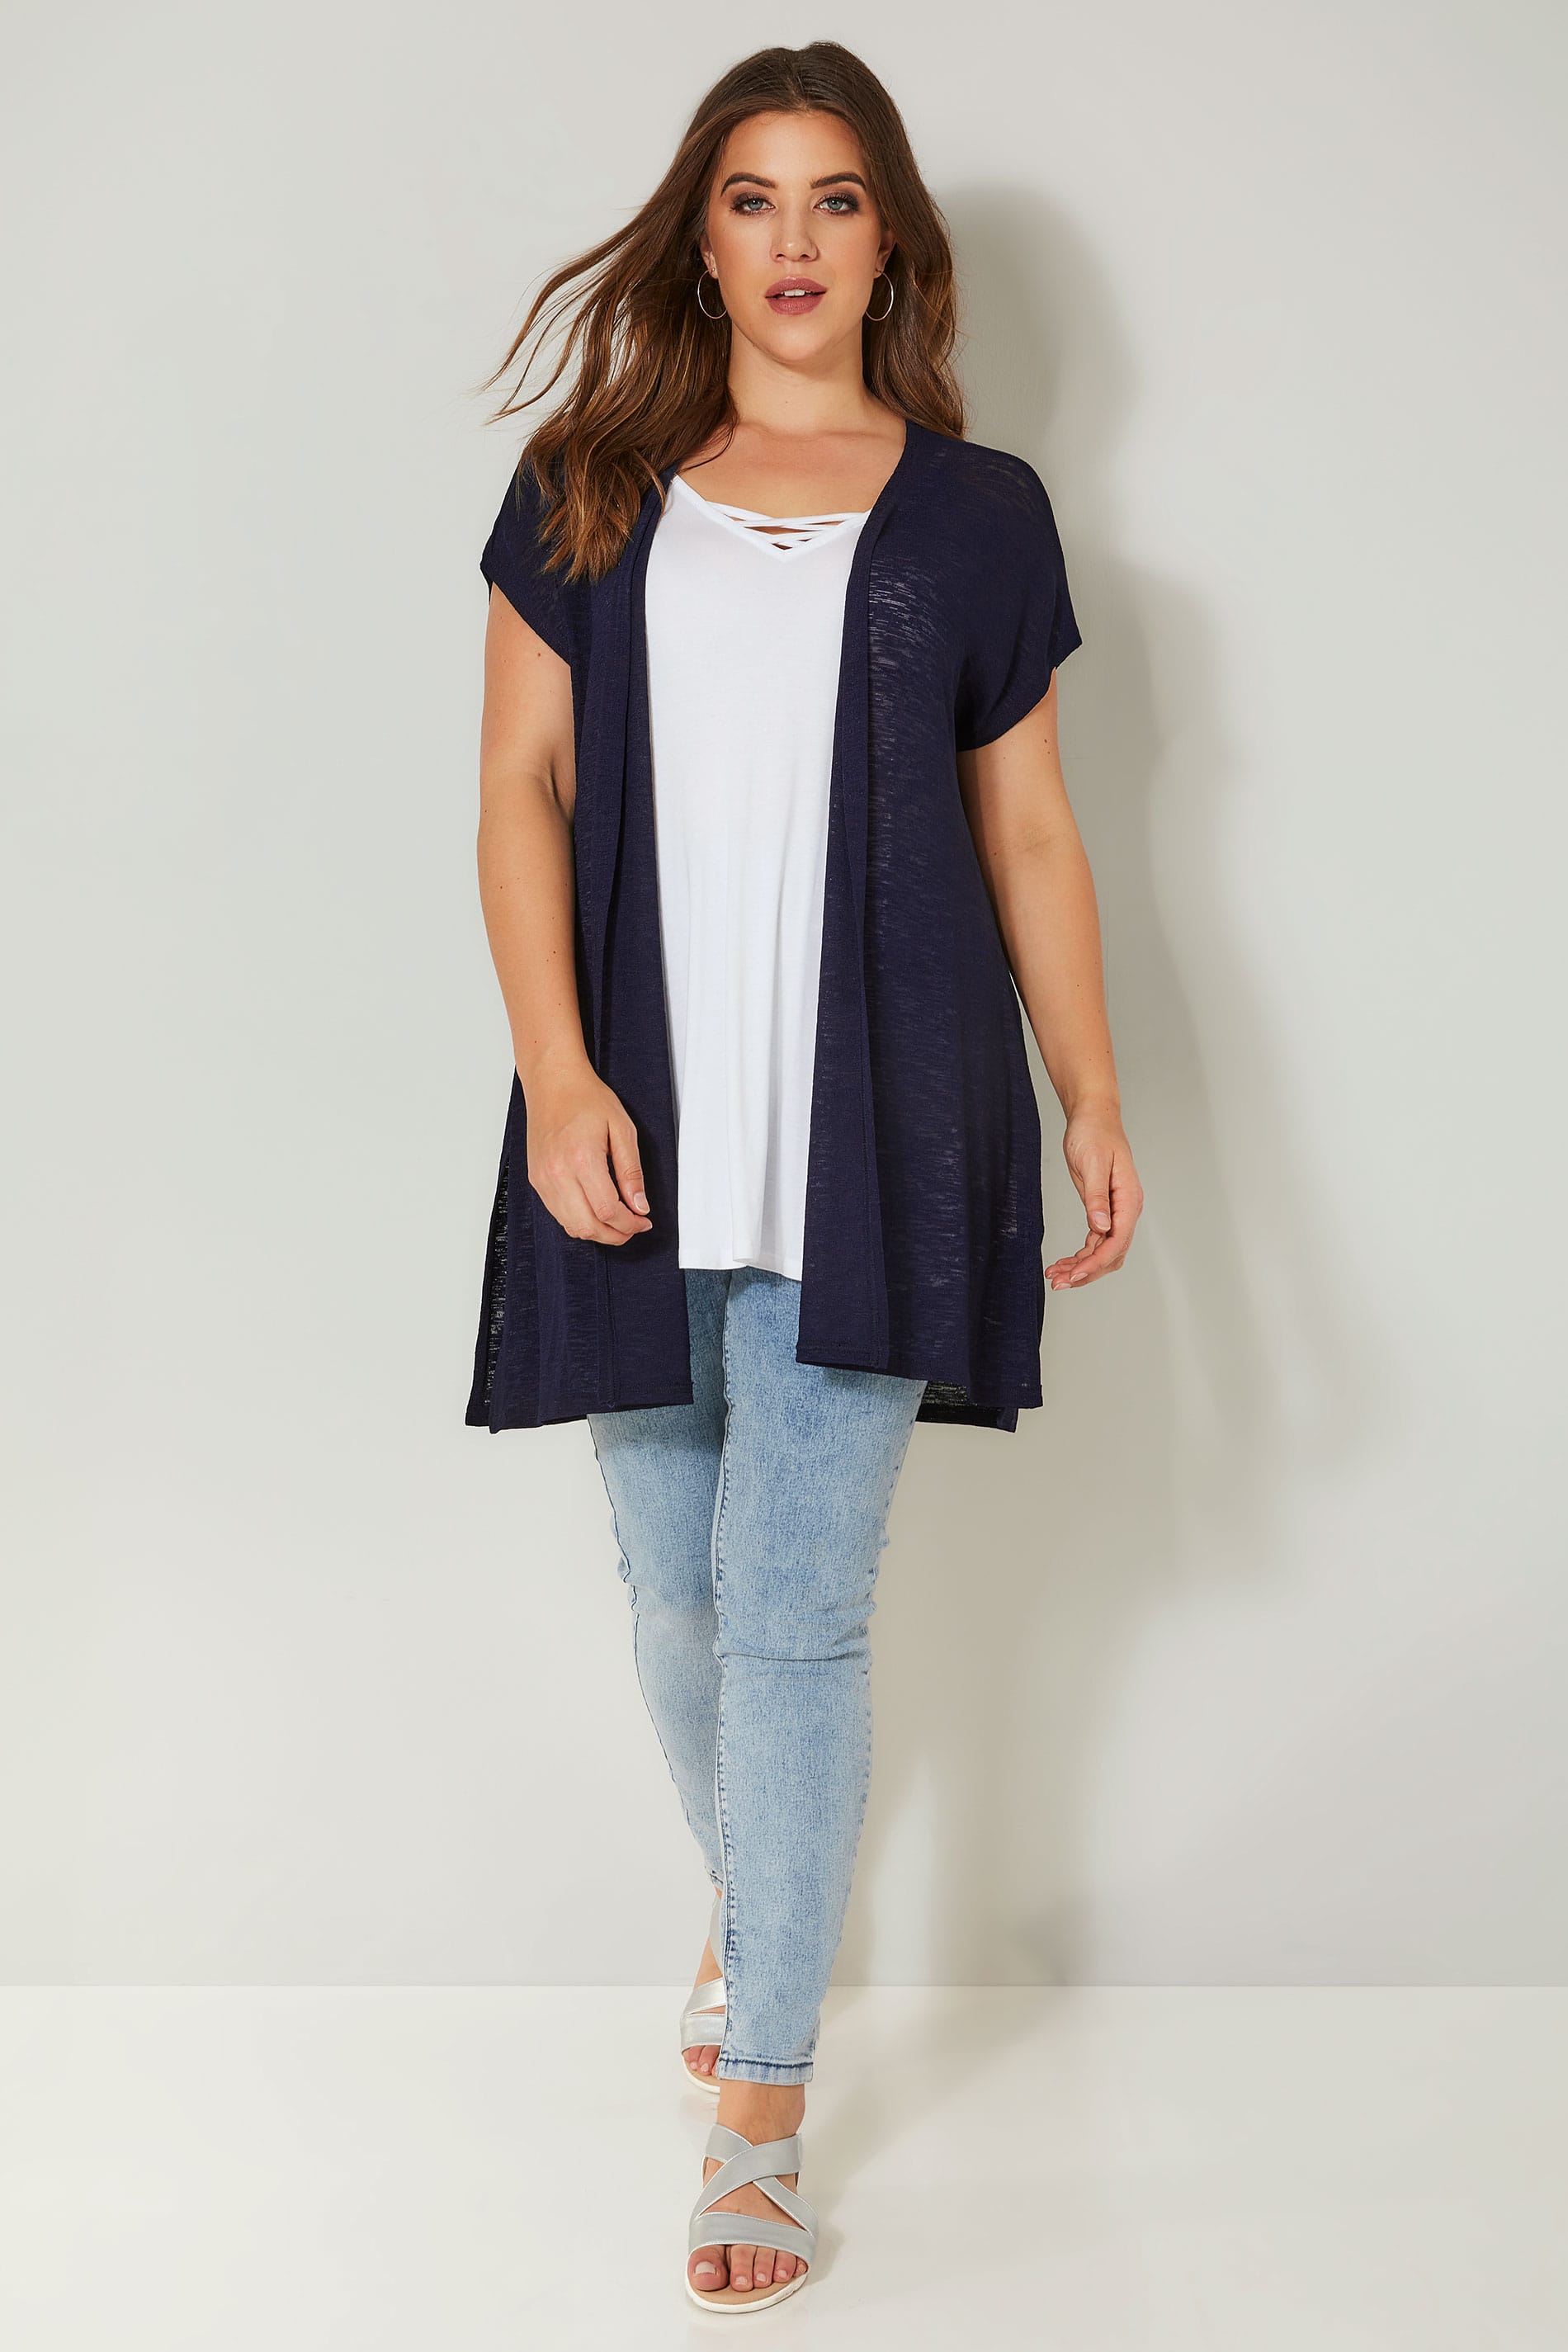 Navy Textured Cardigan With Grown-On Short Sleeves, Plus size 16 to 36